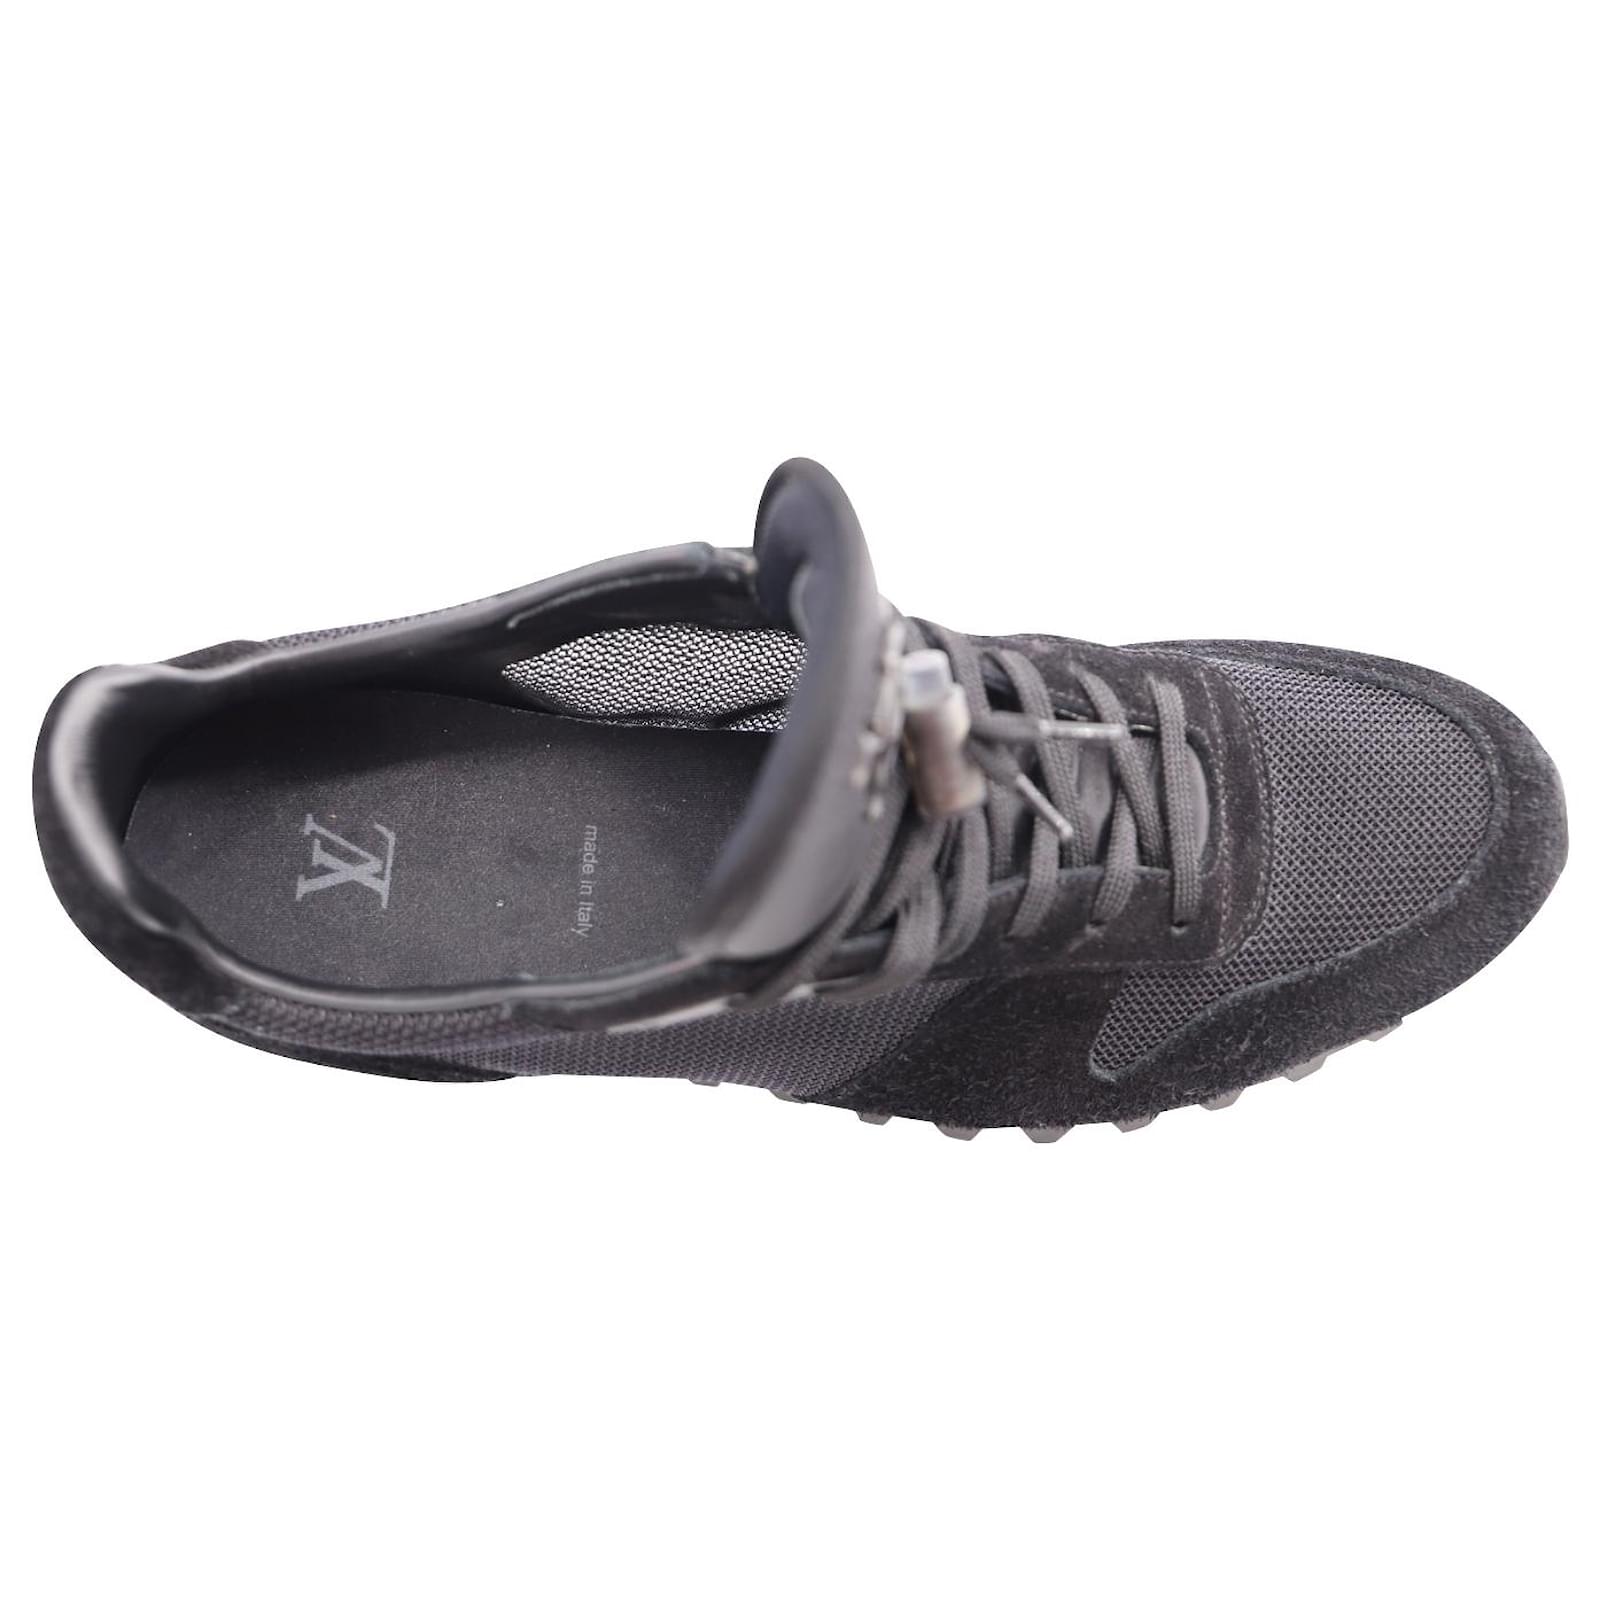 Louis Vuitton Black/Grey Patent Leather And Suede Runner Sneakers Size 42.5  Louis Vuitton | The Luxury Closet